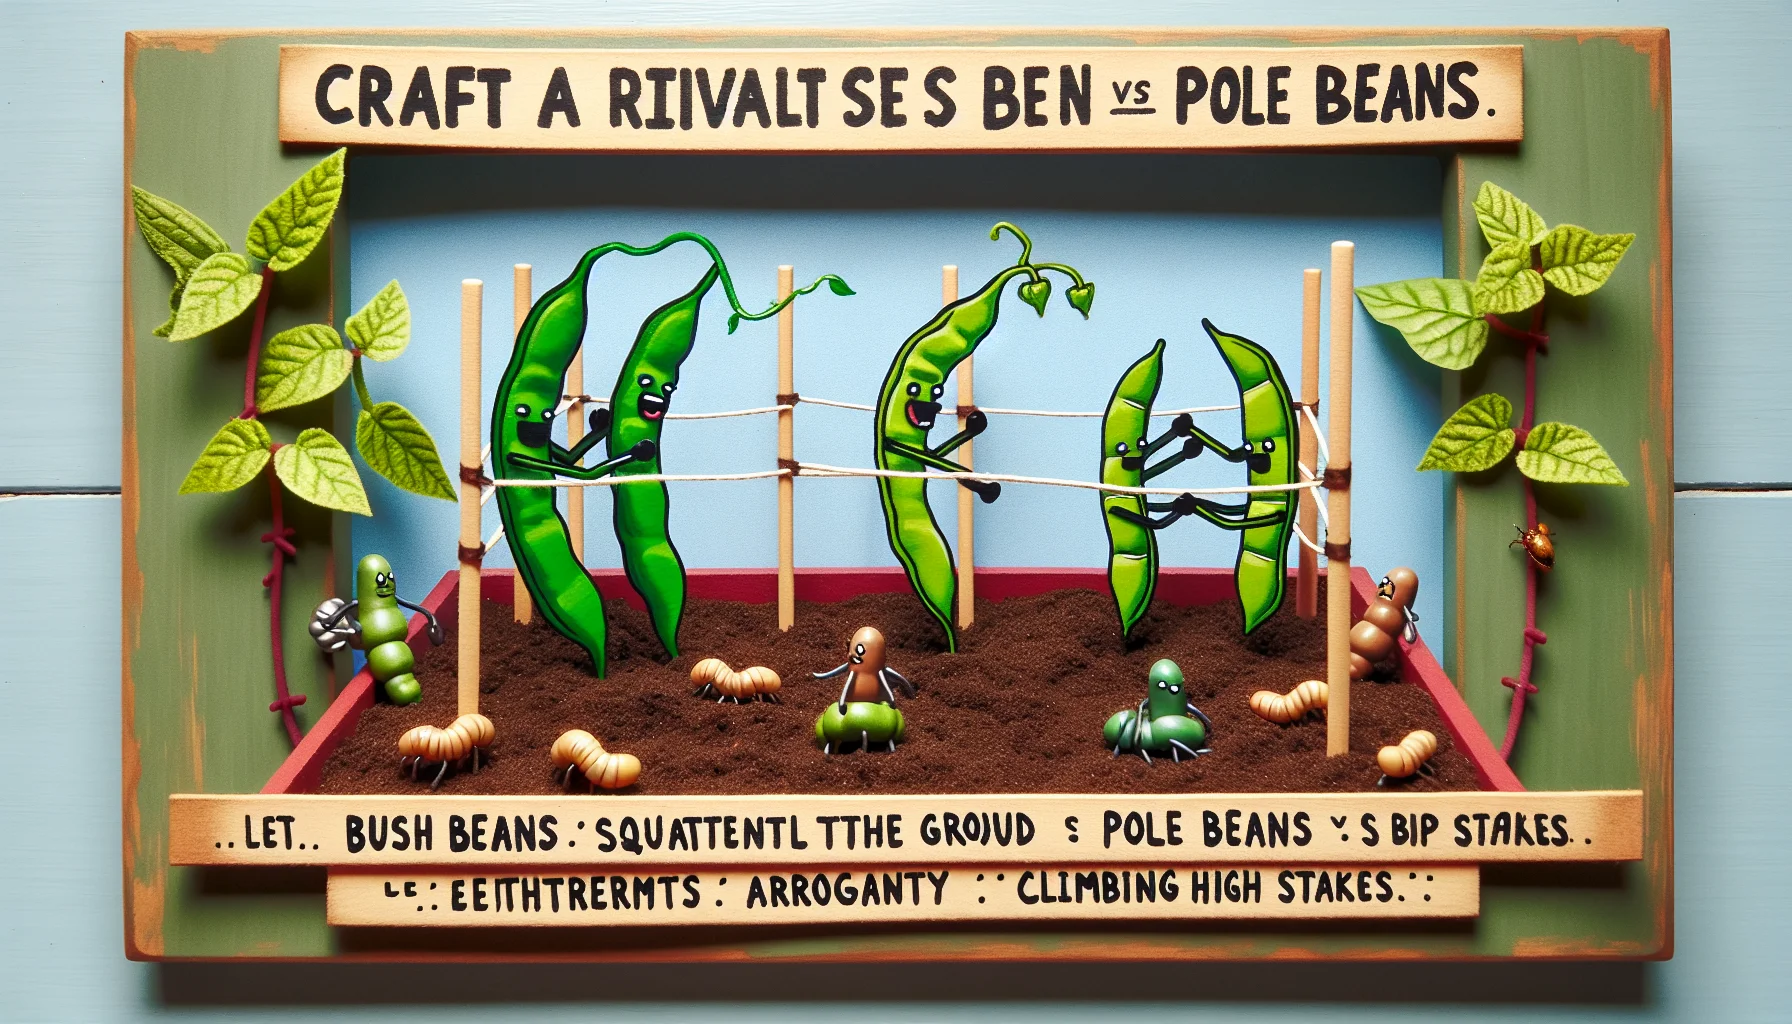 Craft a humorous scene showing the rivalry between bush beans and pole beans. This unique garden setting should prominently feature bush beans squatting low to the ground and pole beans arrogantly climbing high stakes, perhaps participating in a friendly sports competition. There could be earthworms as spectators and insects as cheerleaders, heightening the fun aspect of the gardening world. Let the vibrant colors of green from the plants and brown from the soil spread across the scene, stimulating curiosity and interest in gardening.